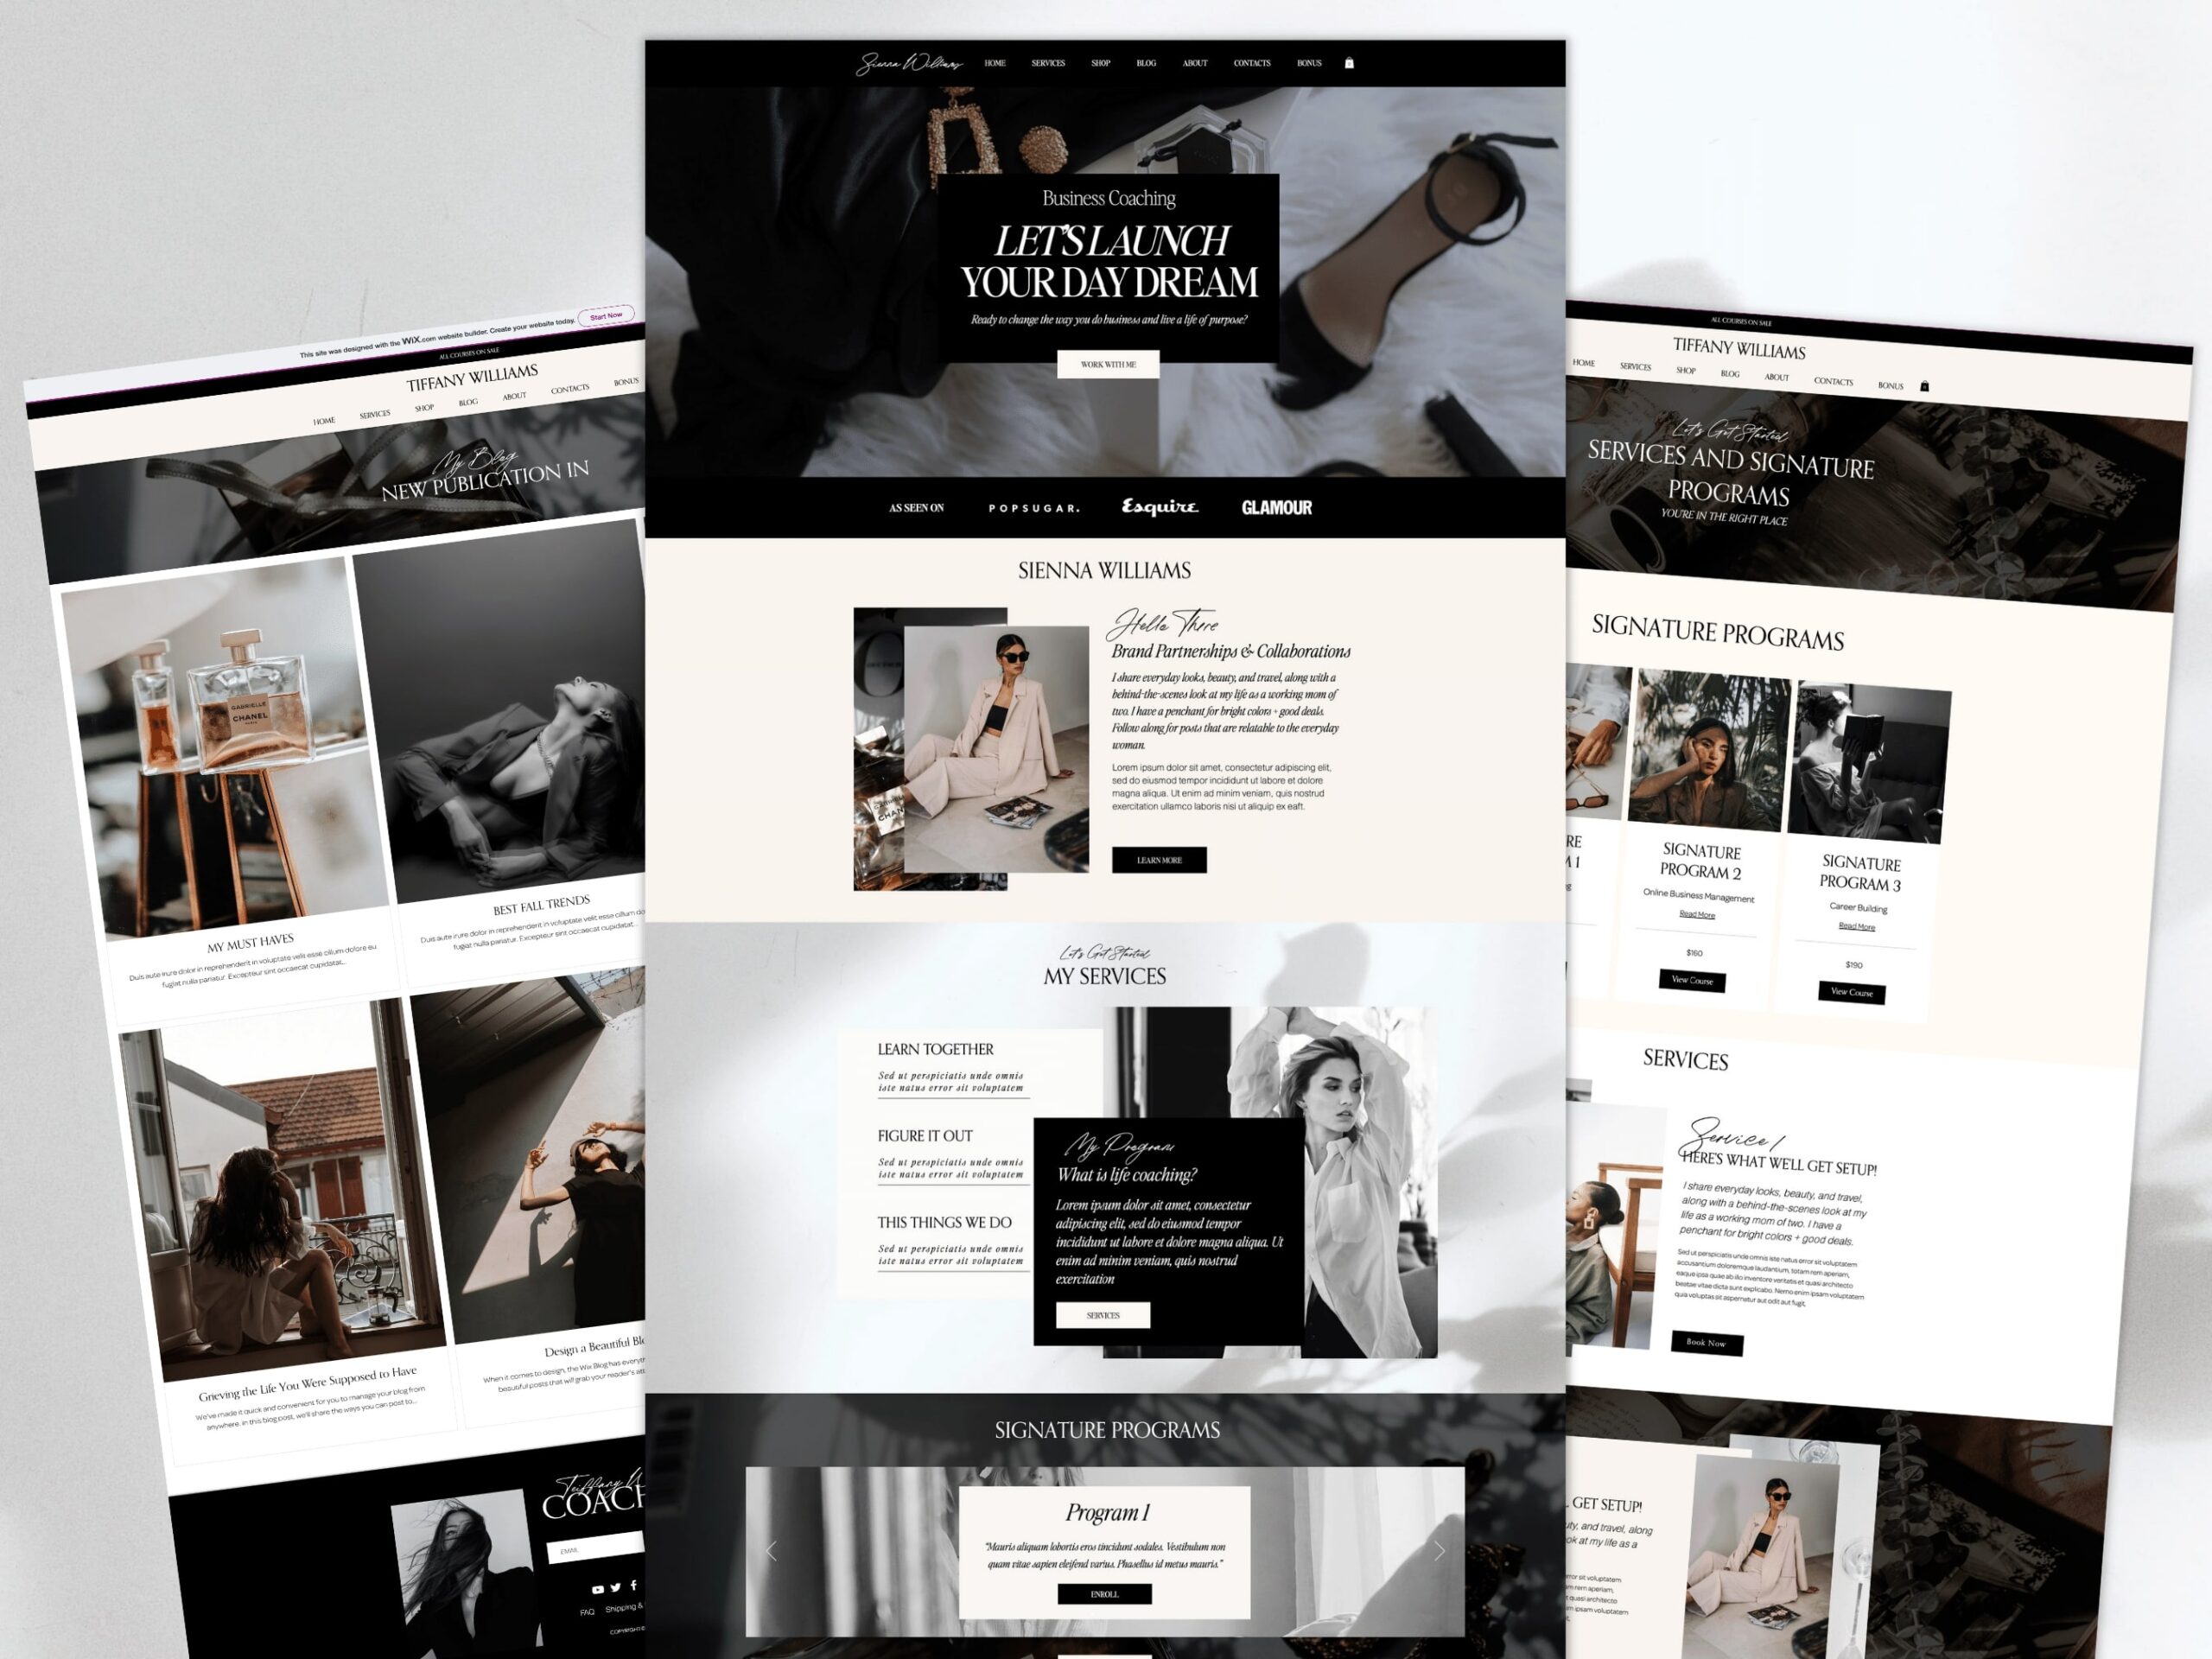 wix templates, Presentybox, wix themes, wix blog templates, wix premium templates, best wix templates, wix landing page templates, Wix website templates, Wix templates for sale, Showit